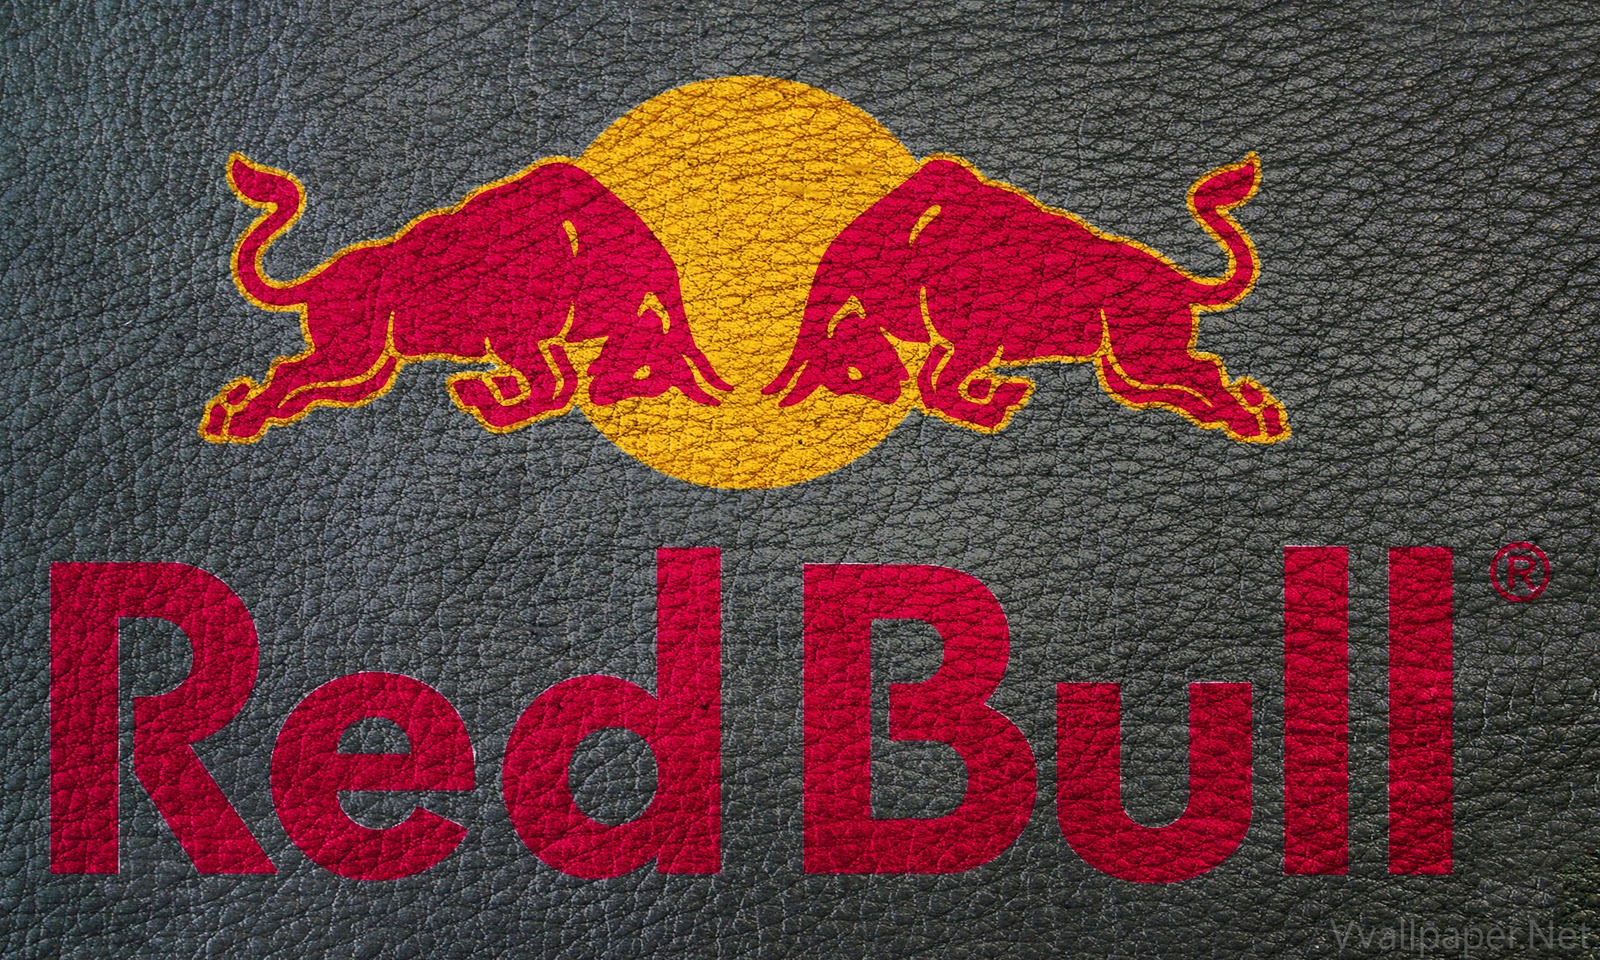 Free Download Central Wallpaper Red Bull Hd Logo Wallpapers 1600x960 For Your Desktop Mobile Tablet Explore 76 Redbull Wallpapers Redbull Wallpapers Redbull Wallpaper